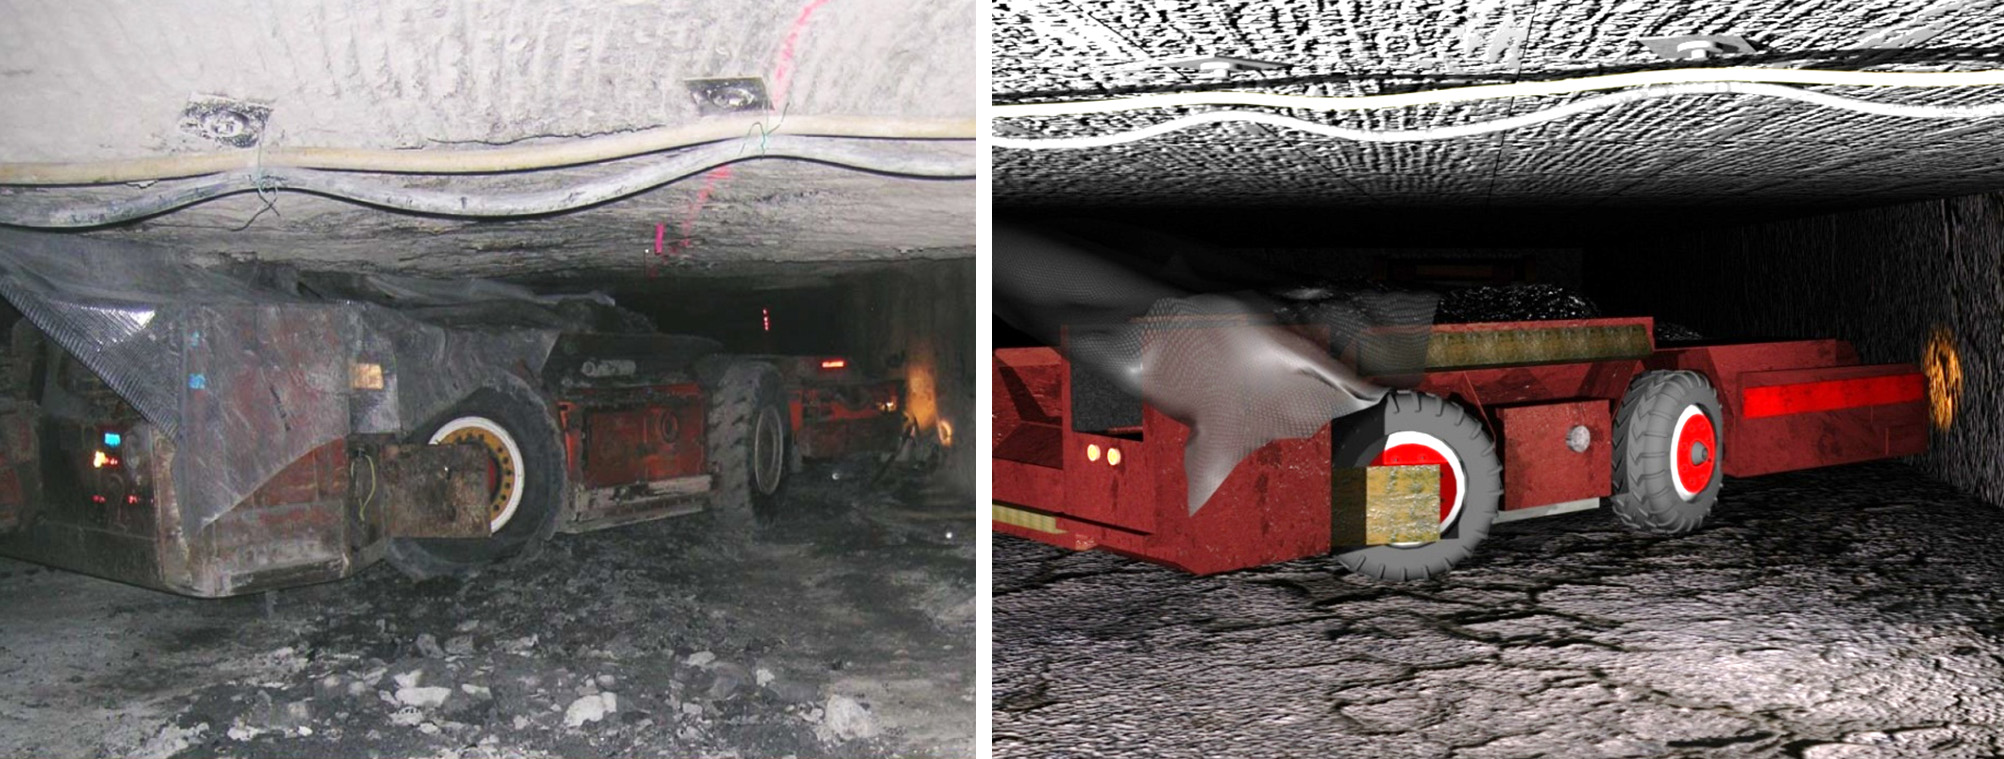 MSHA fatality report accident scene reconstruction featuring underground mine buggy